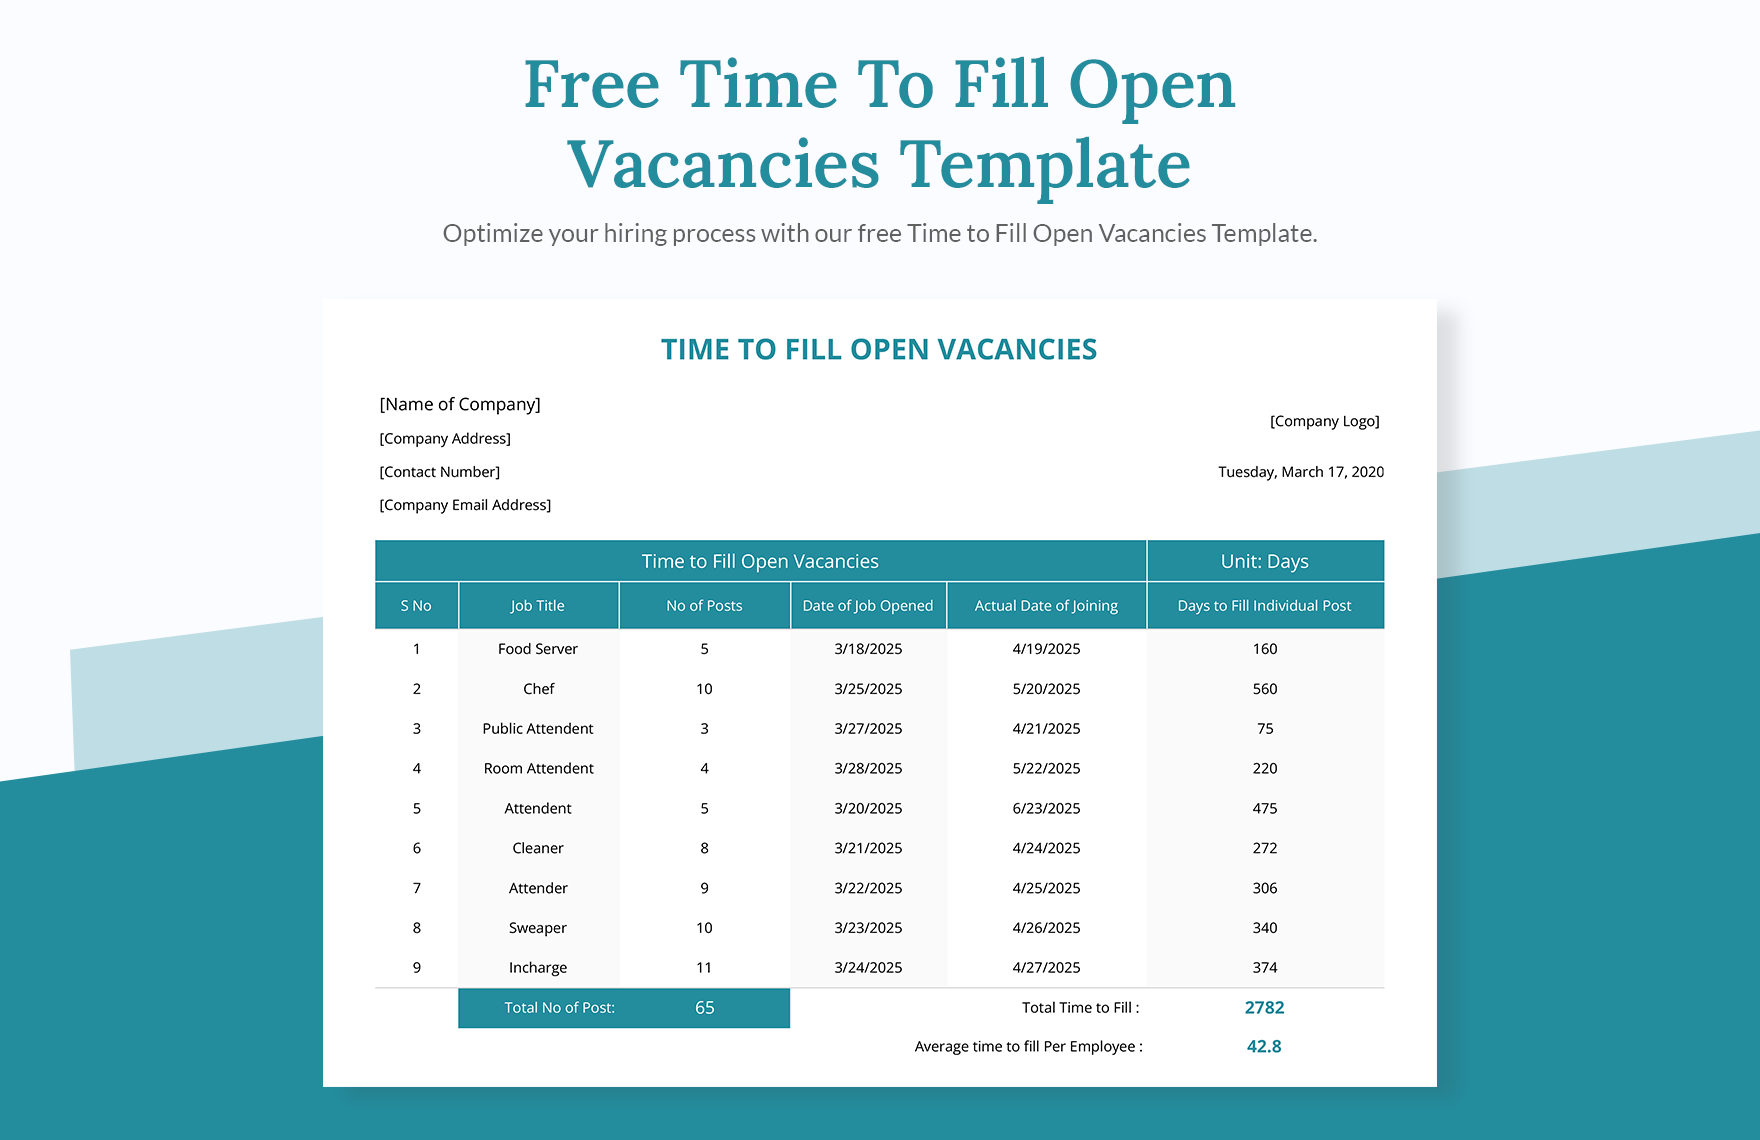 Free Time To Fill Open Vacancies Template